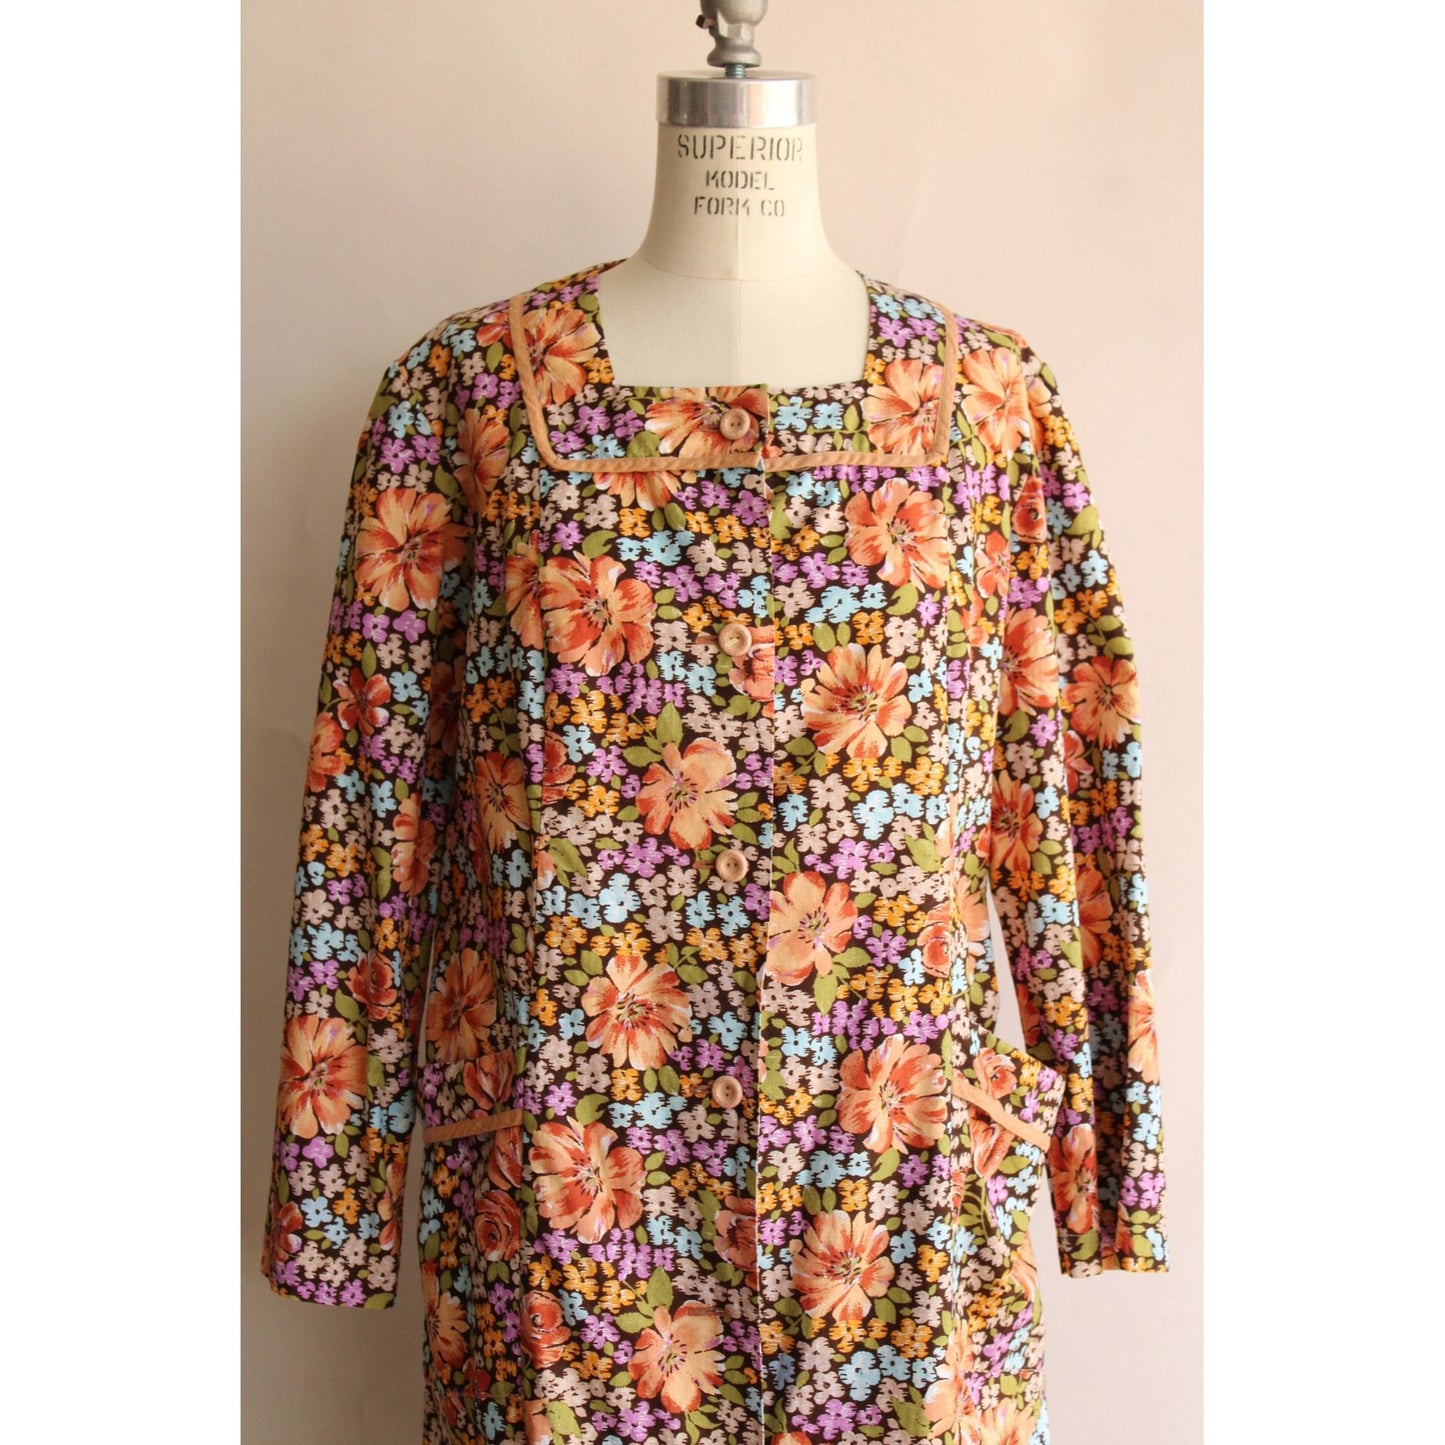 Vintage 1960s Floral Print Housecoat with Pockets